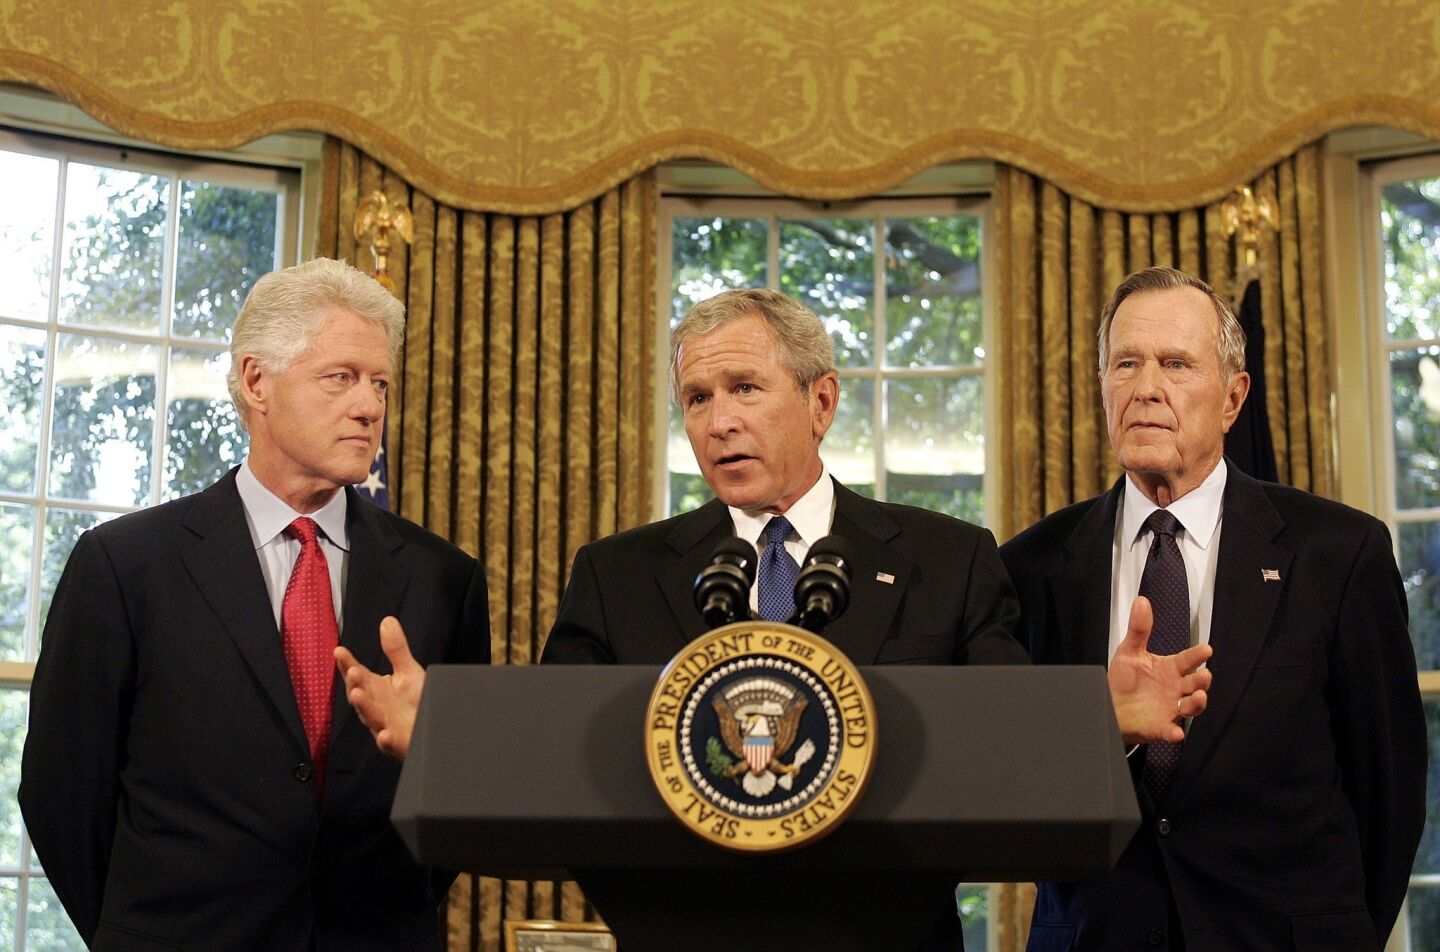 President George W. Bush speaks from the White House after Hurricane Katrina in 2005, as former presidents Bill Clinton, left, and George H.W. Bush look on.